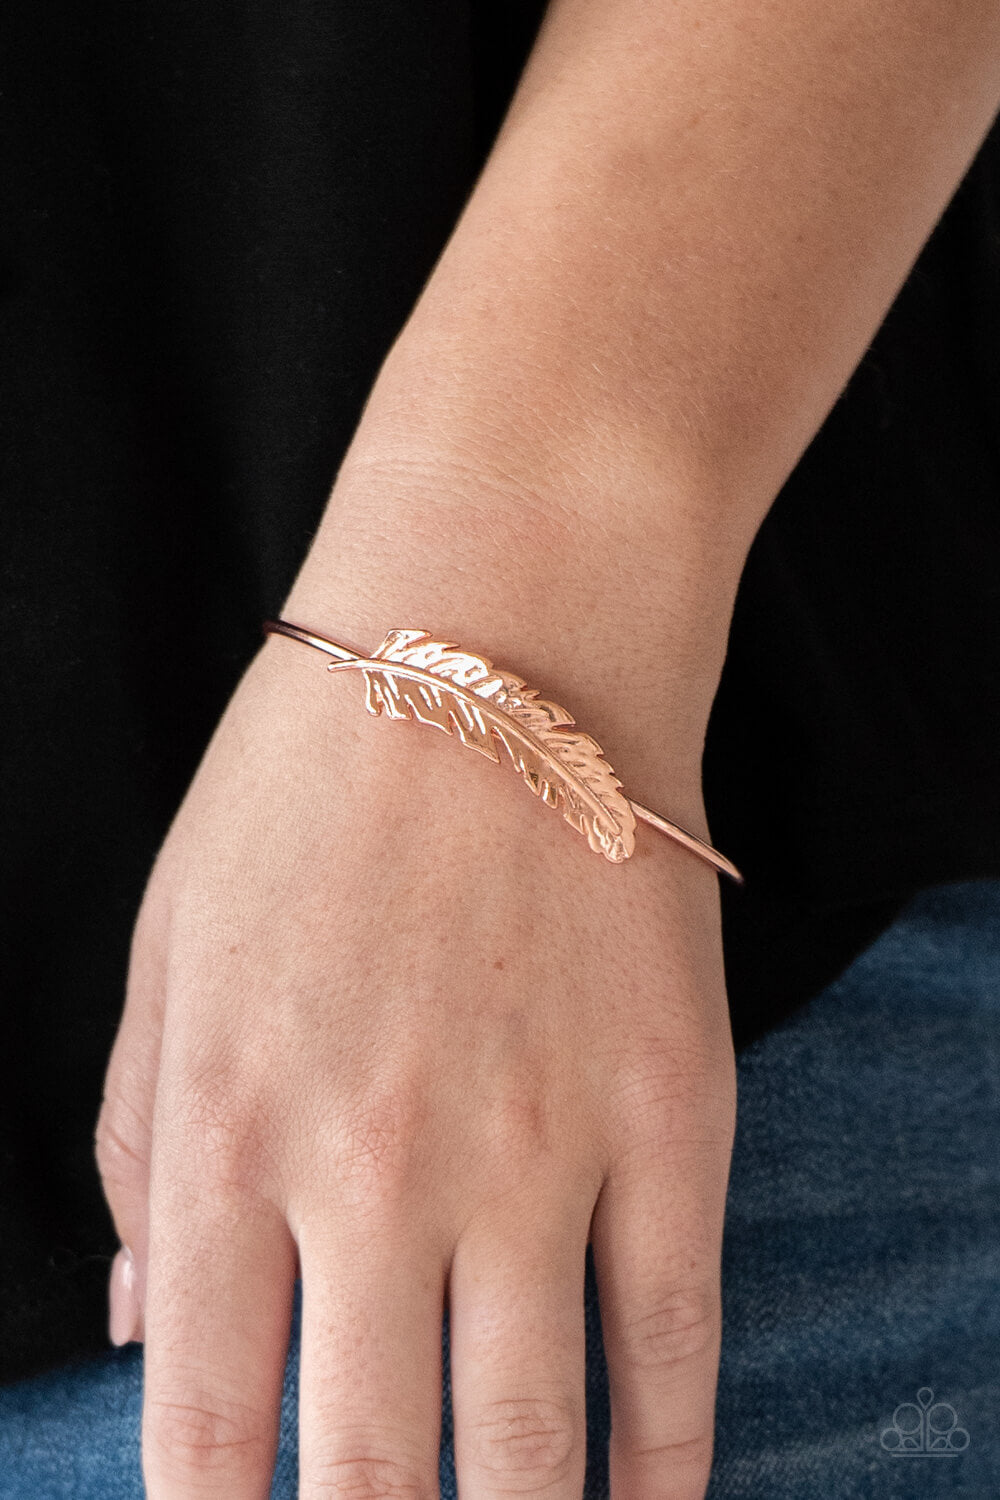 How Do You Like This FEATHER? - Copper Bracelet - Princess Glam Shop